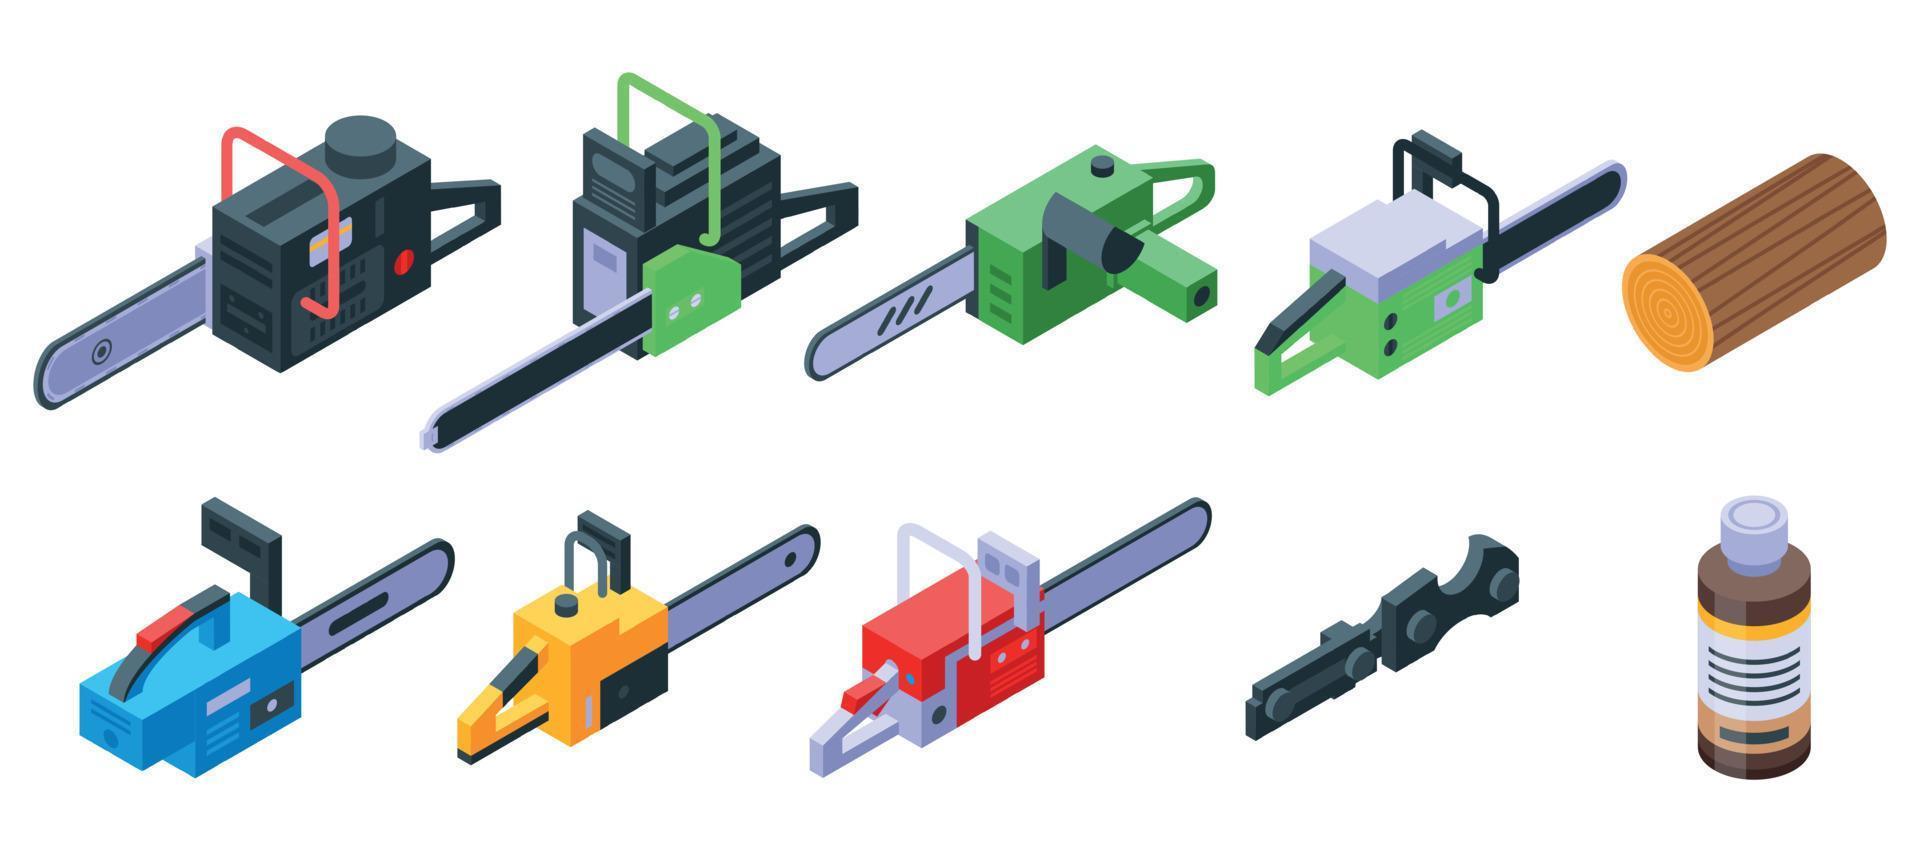 Chainsaw icons set, isometric style vector